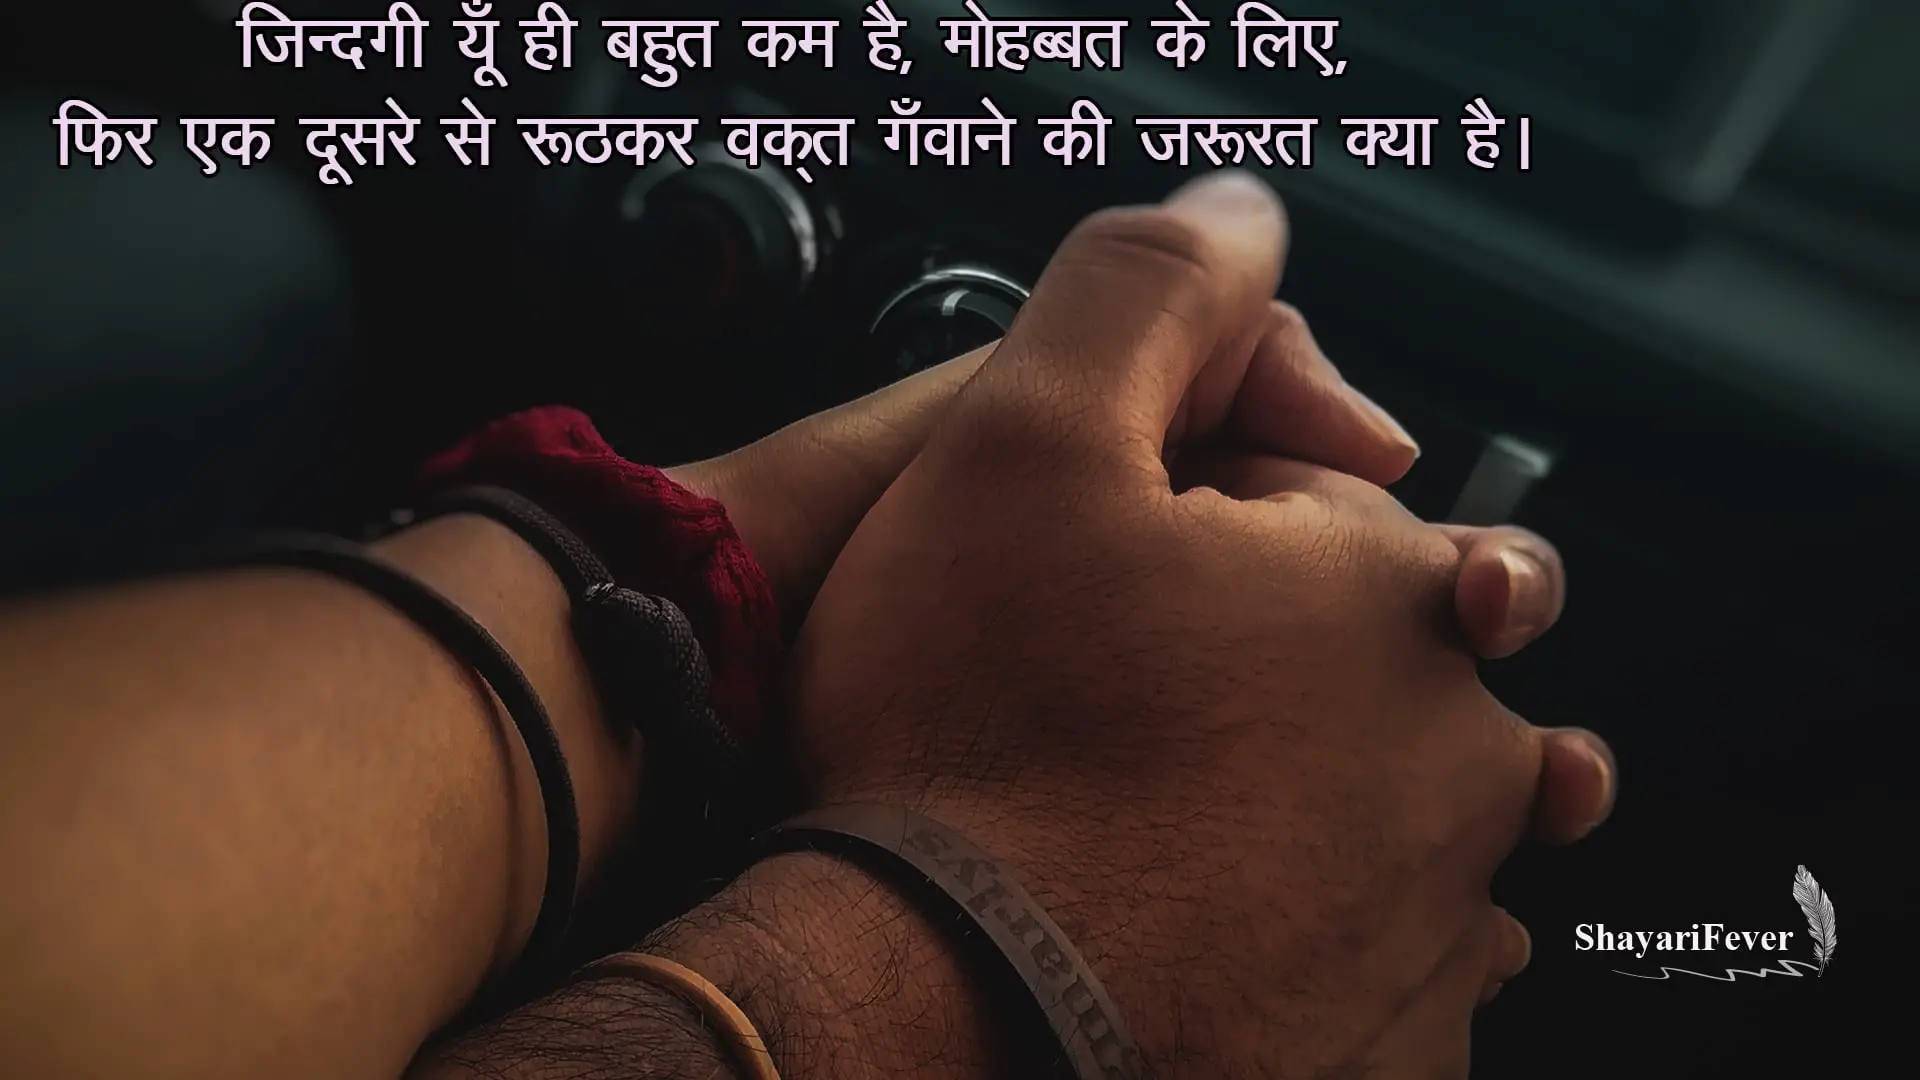 best love quotes in hindi for girlfriend